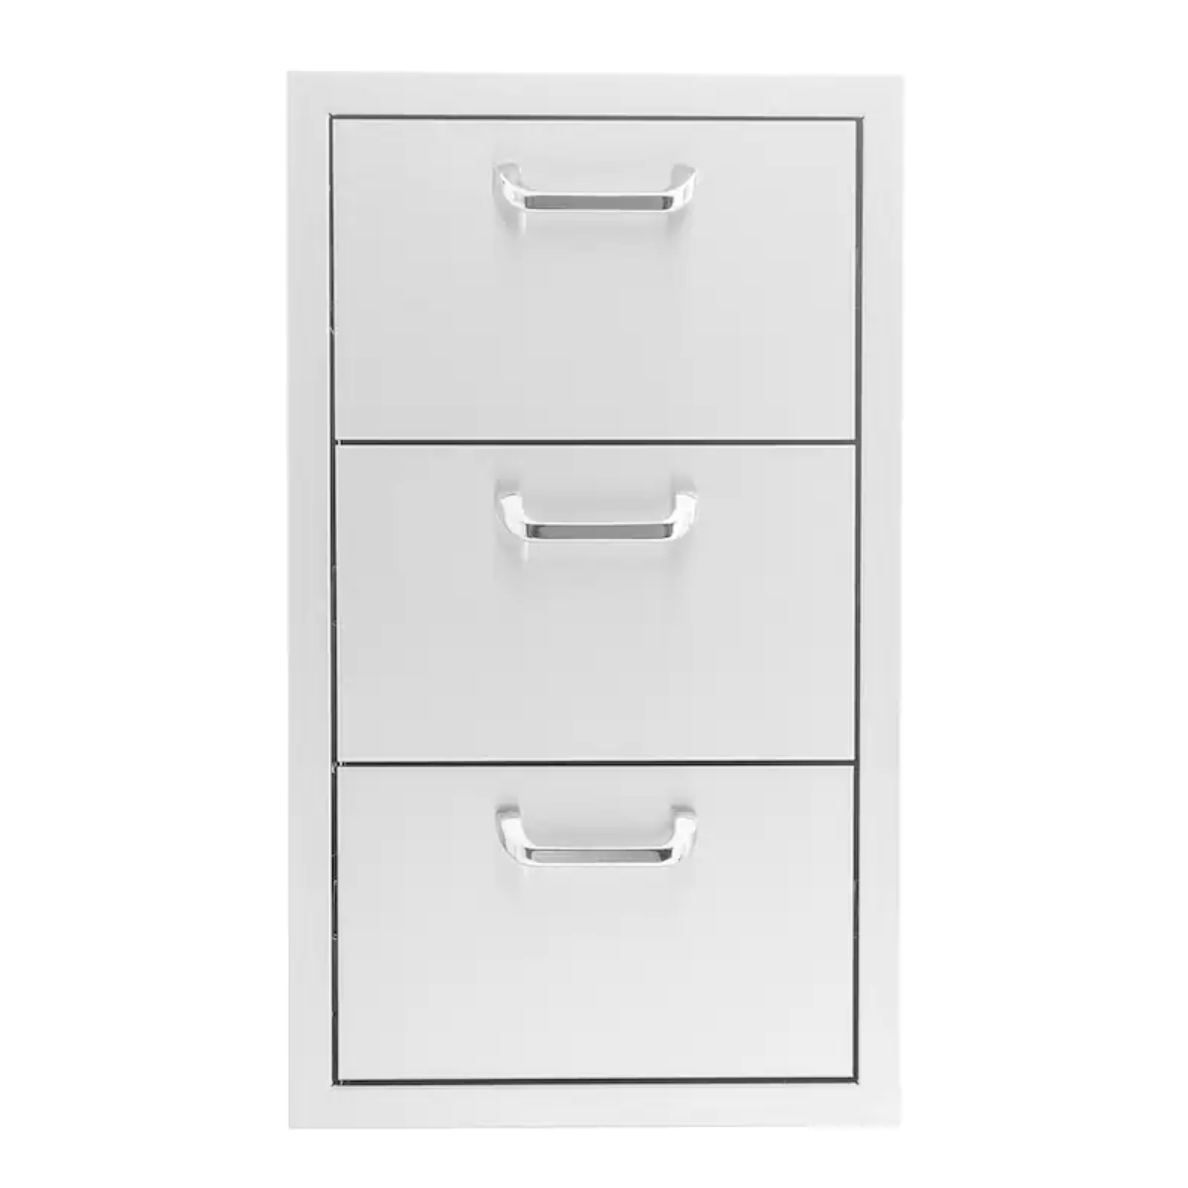 PCM 260 Series 16" Stainless Steel Triple Access Drawer